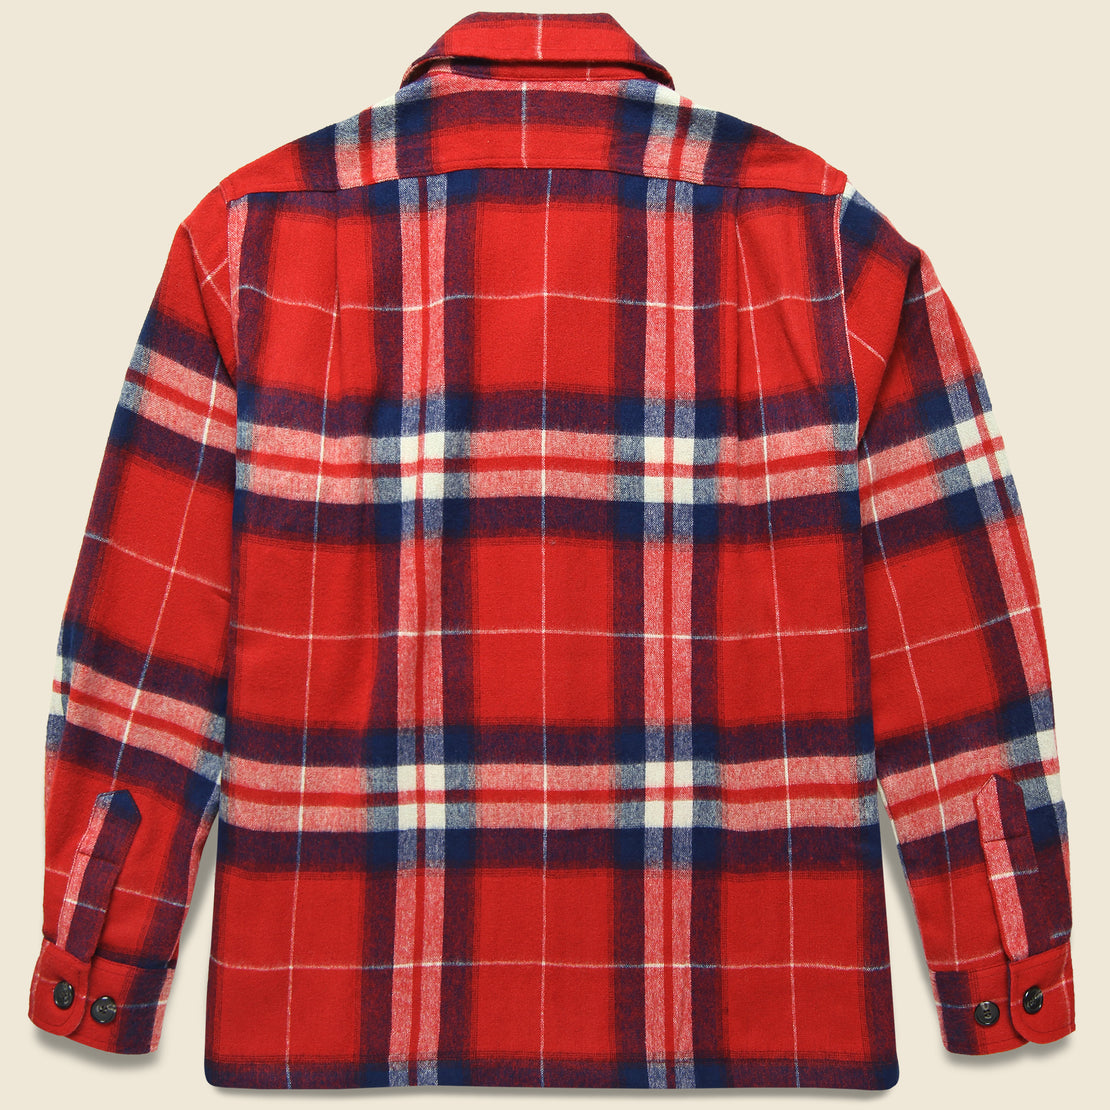 Ombre Plaid Military Shirt Jacket - Red - Corridor - STAG Provisions - Outerwear - Shirt Jacket